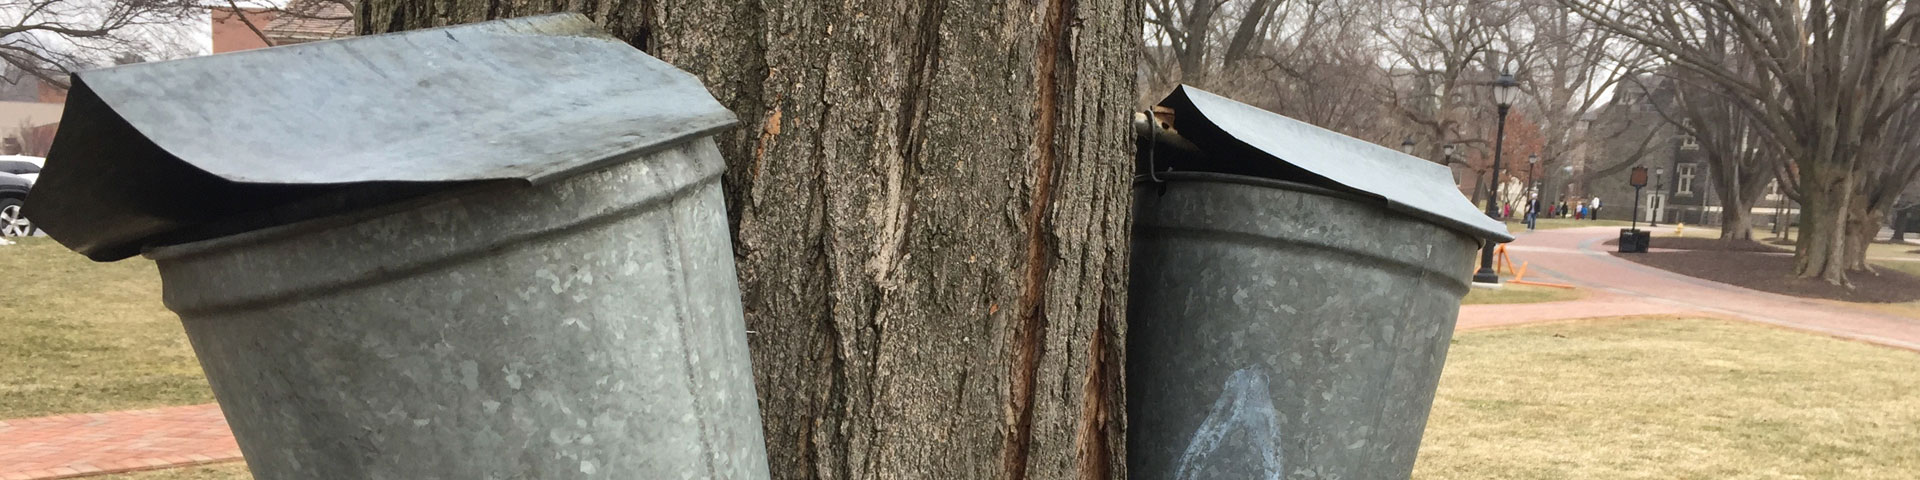 Two steel buckets hang from a maple tree.